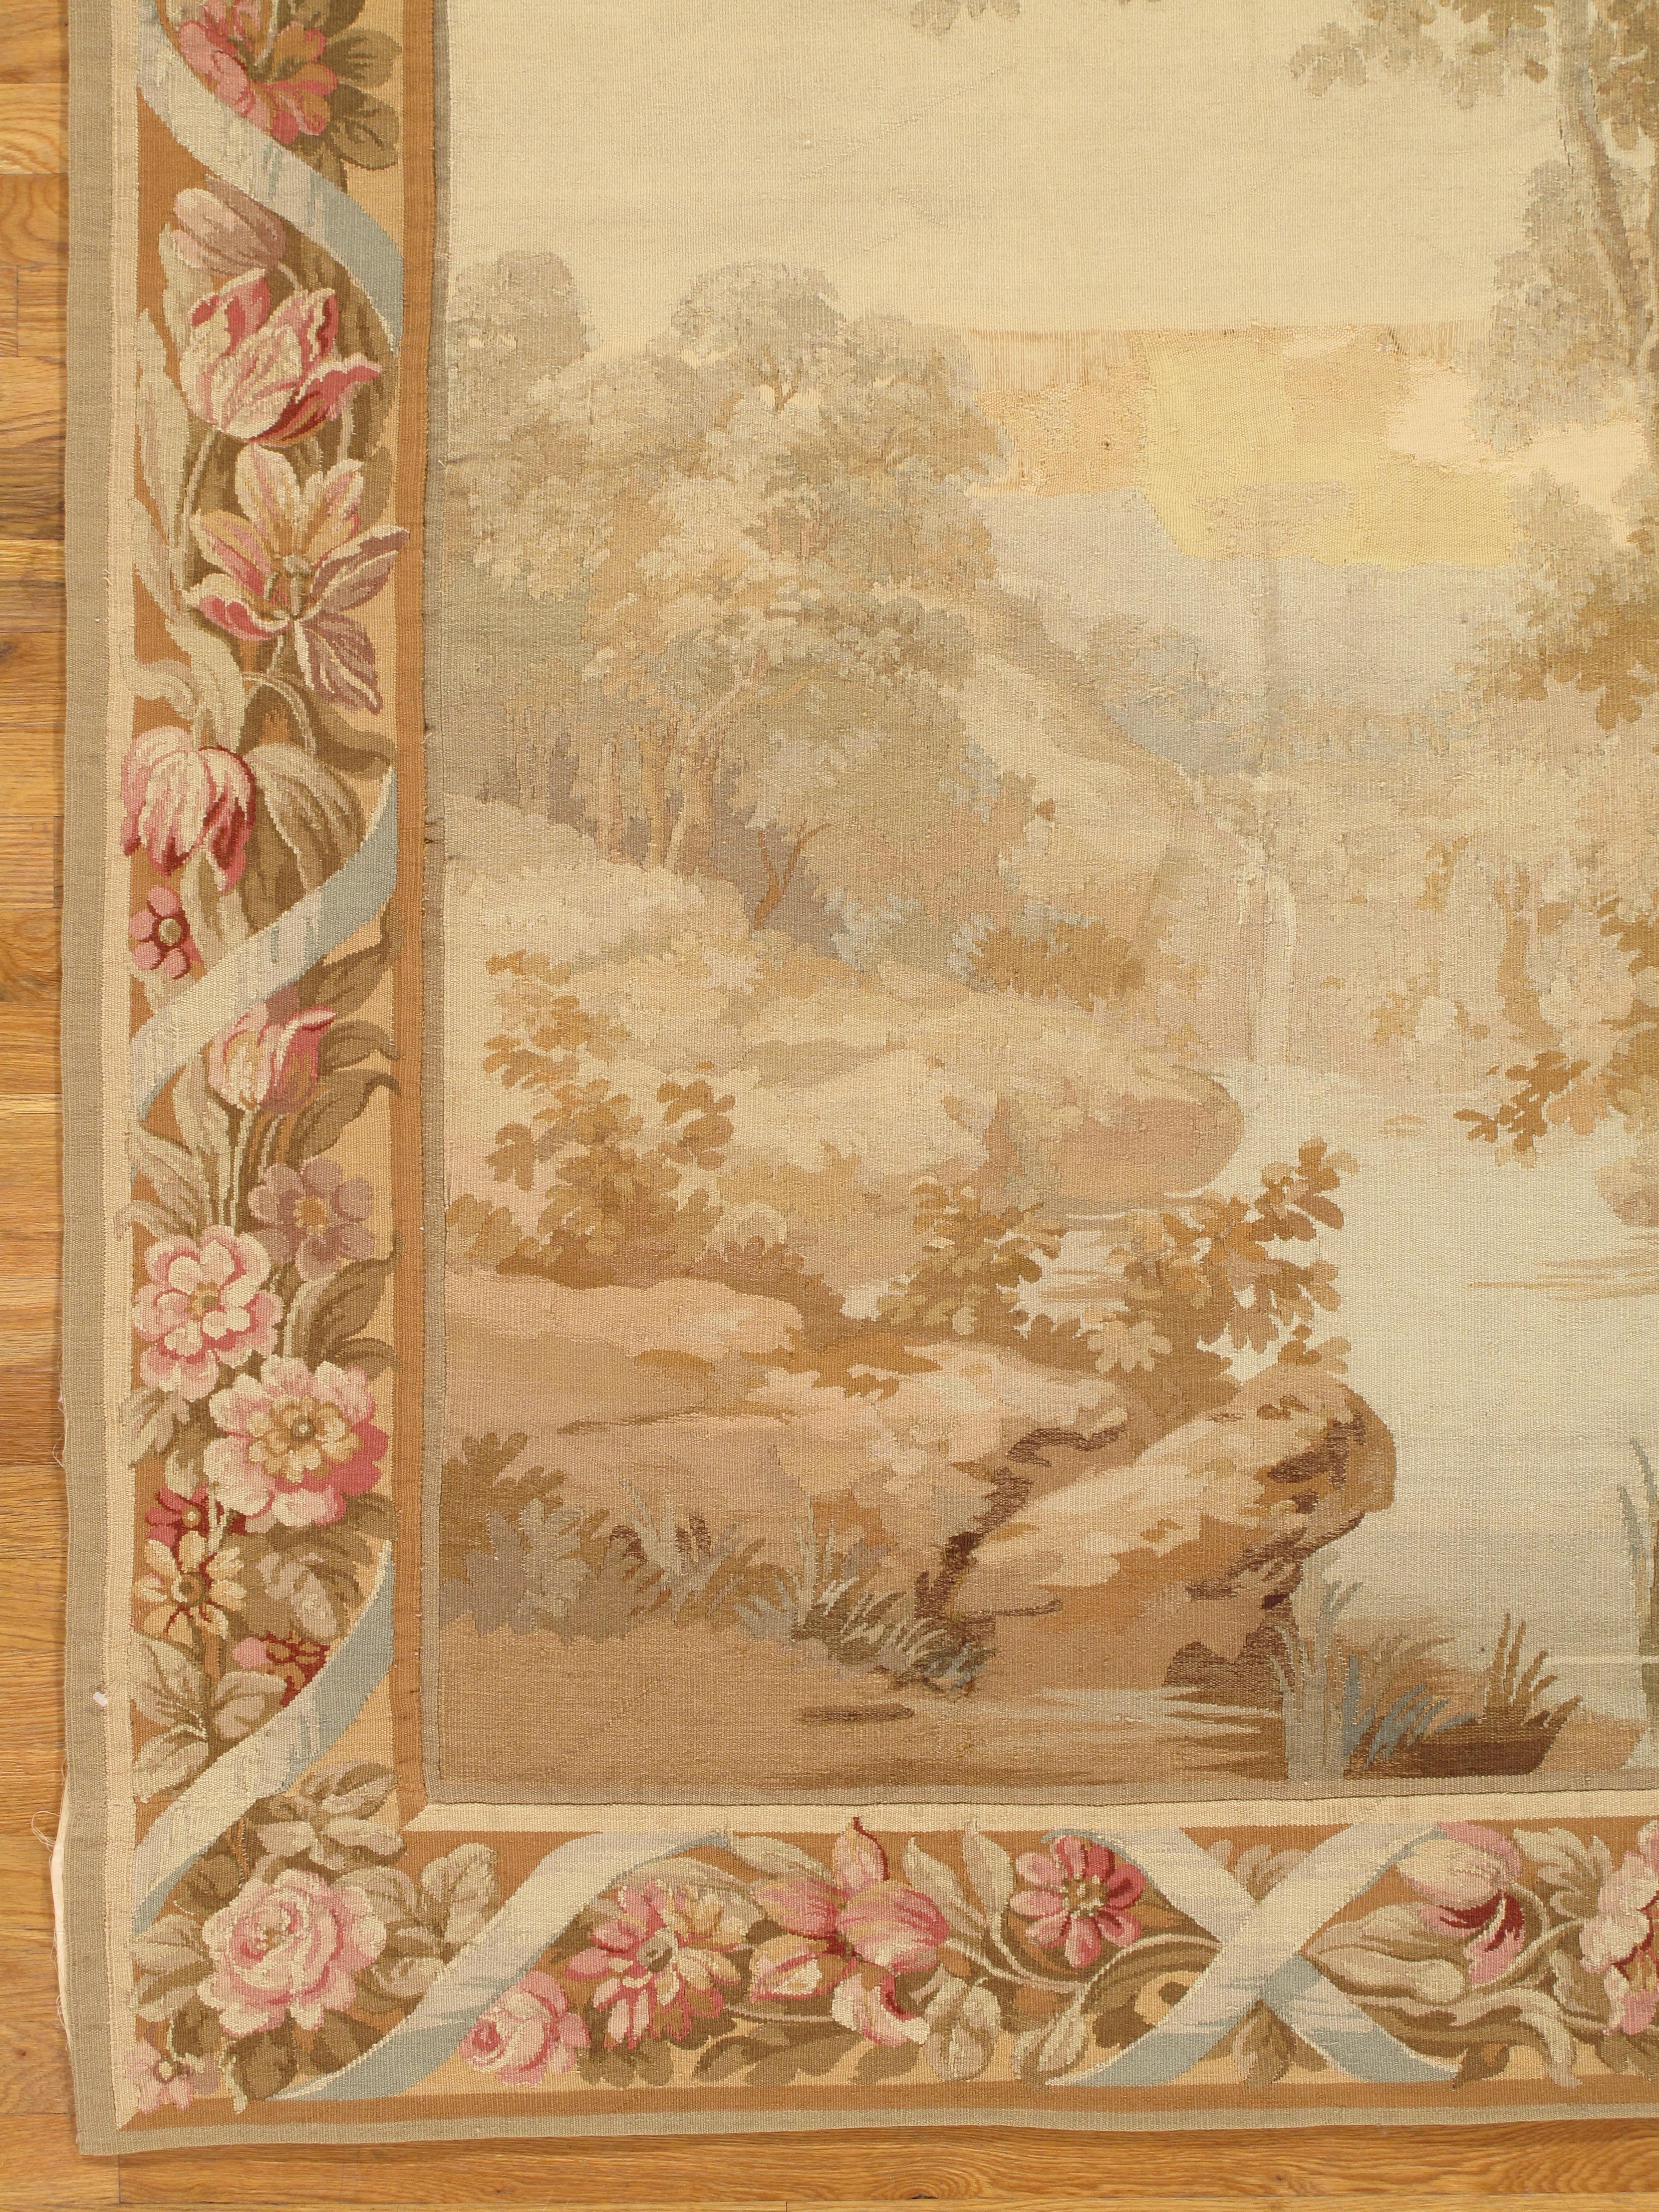 19th Century Aubusson Tapestry, Handmade, Ivory, Taupe, Cream For Sale 4